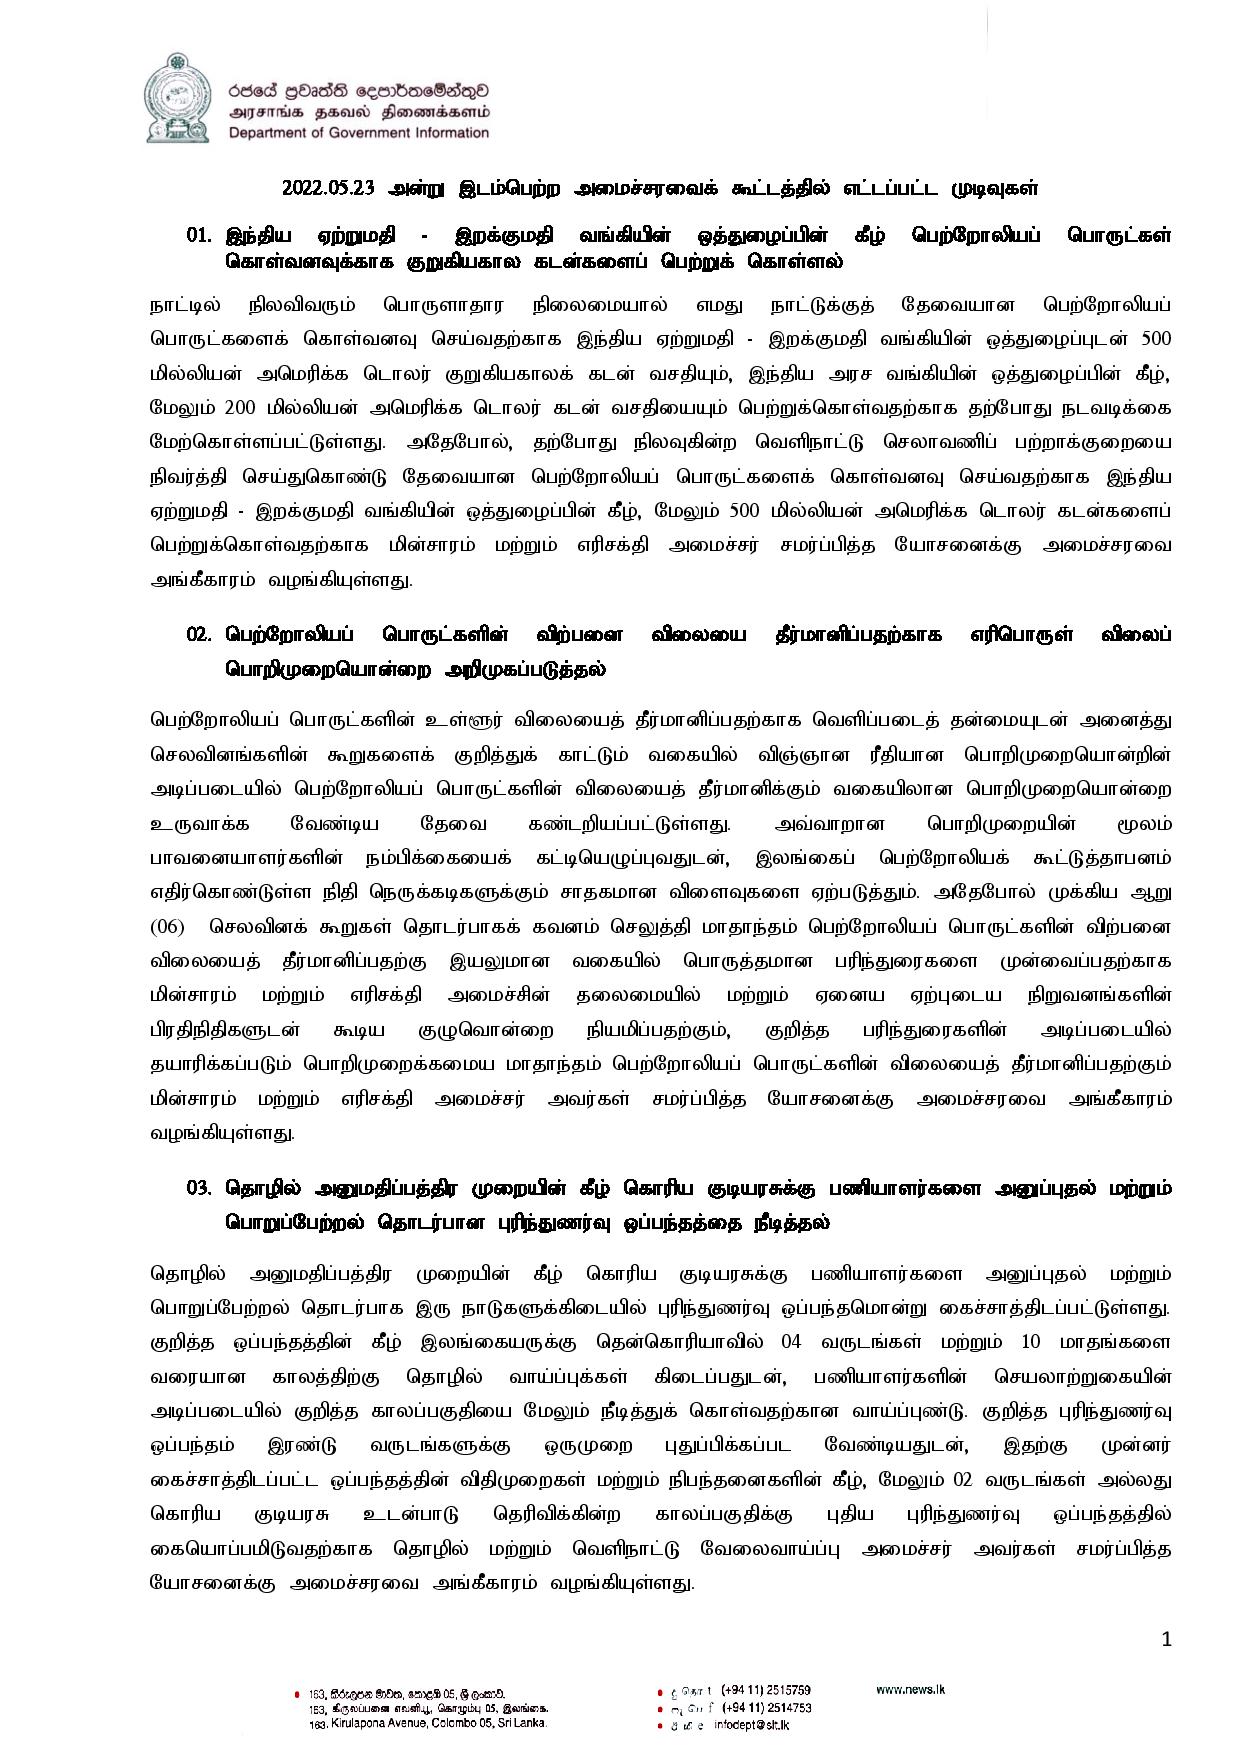 Cabinet Decisions on 23.05.2022 Tamil page 001